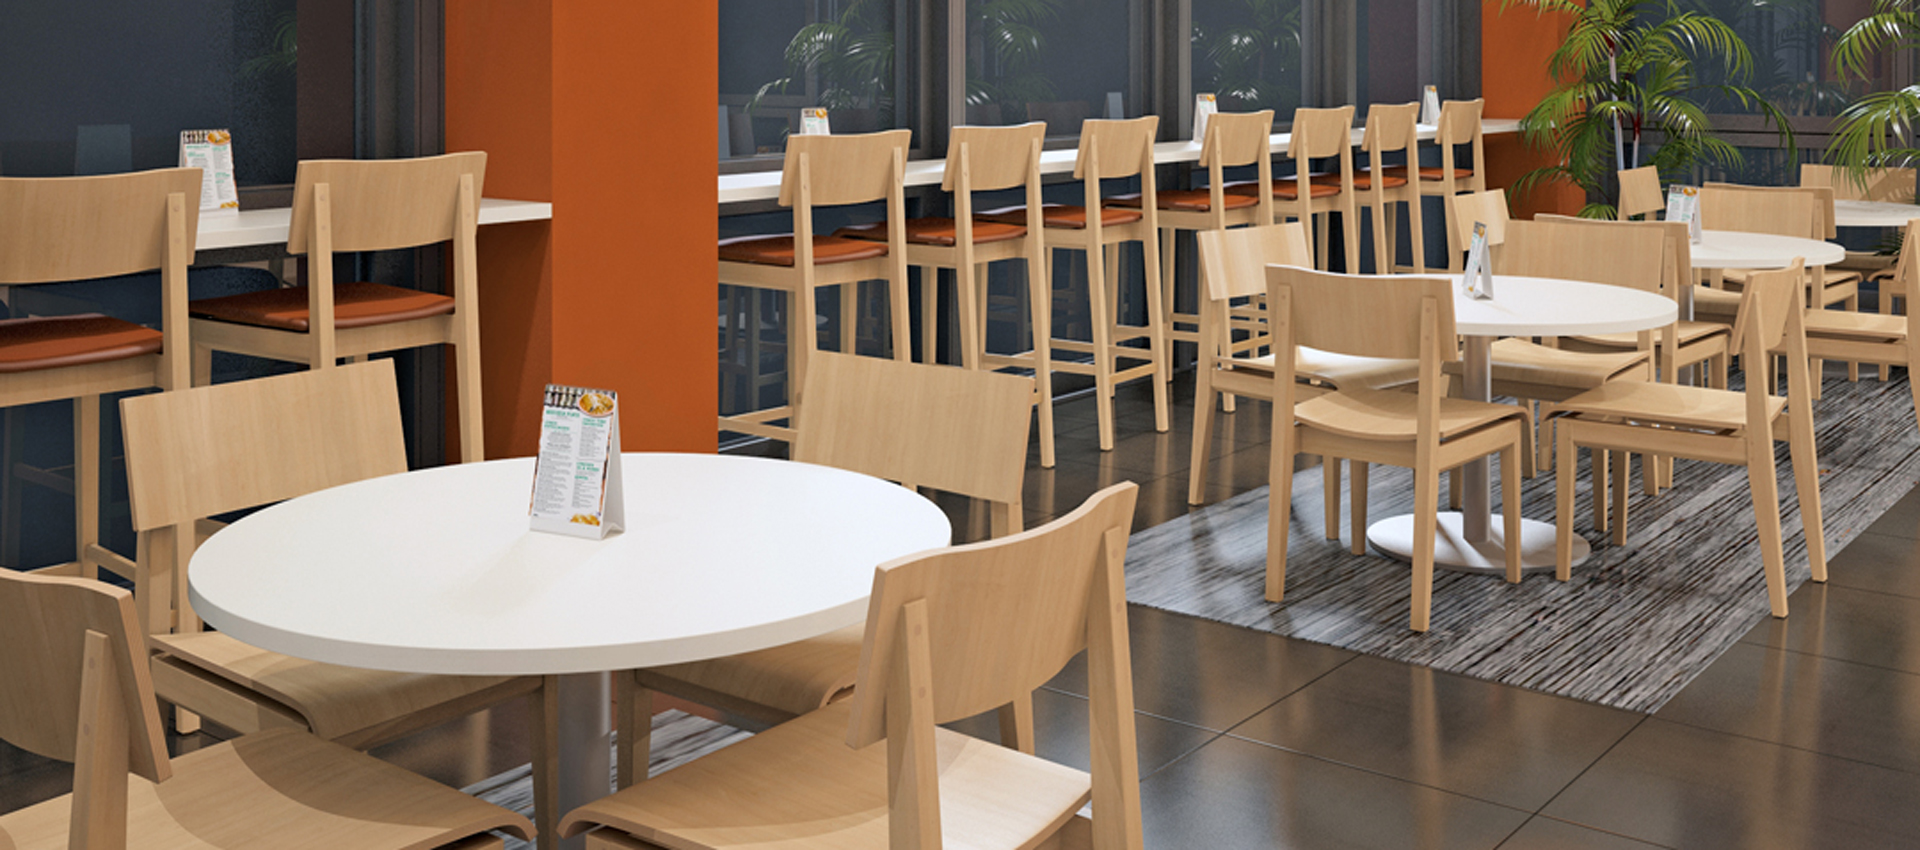 Wood chairs, stools and cafe tables